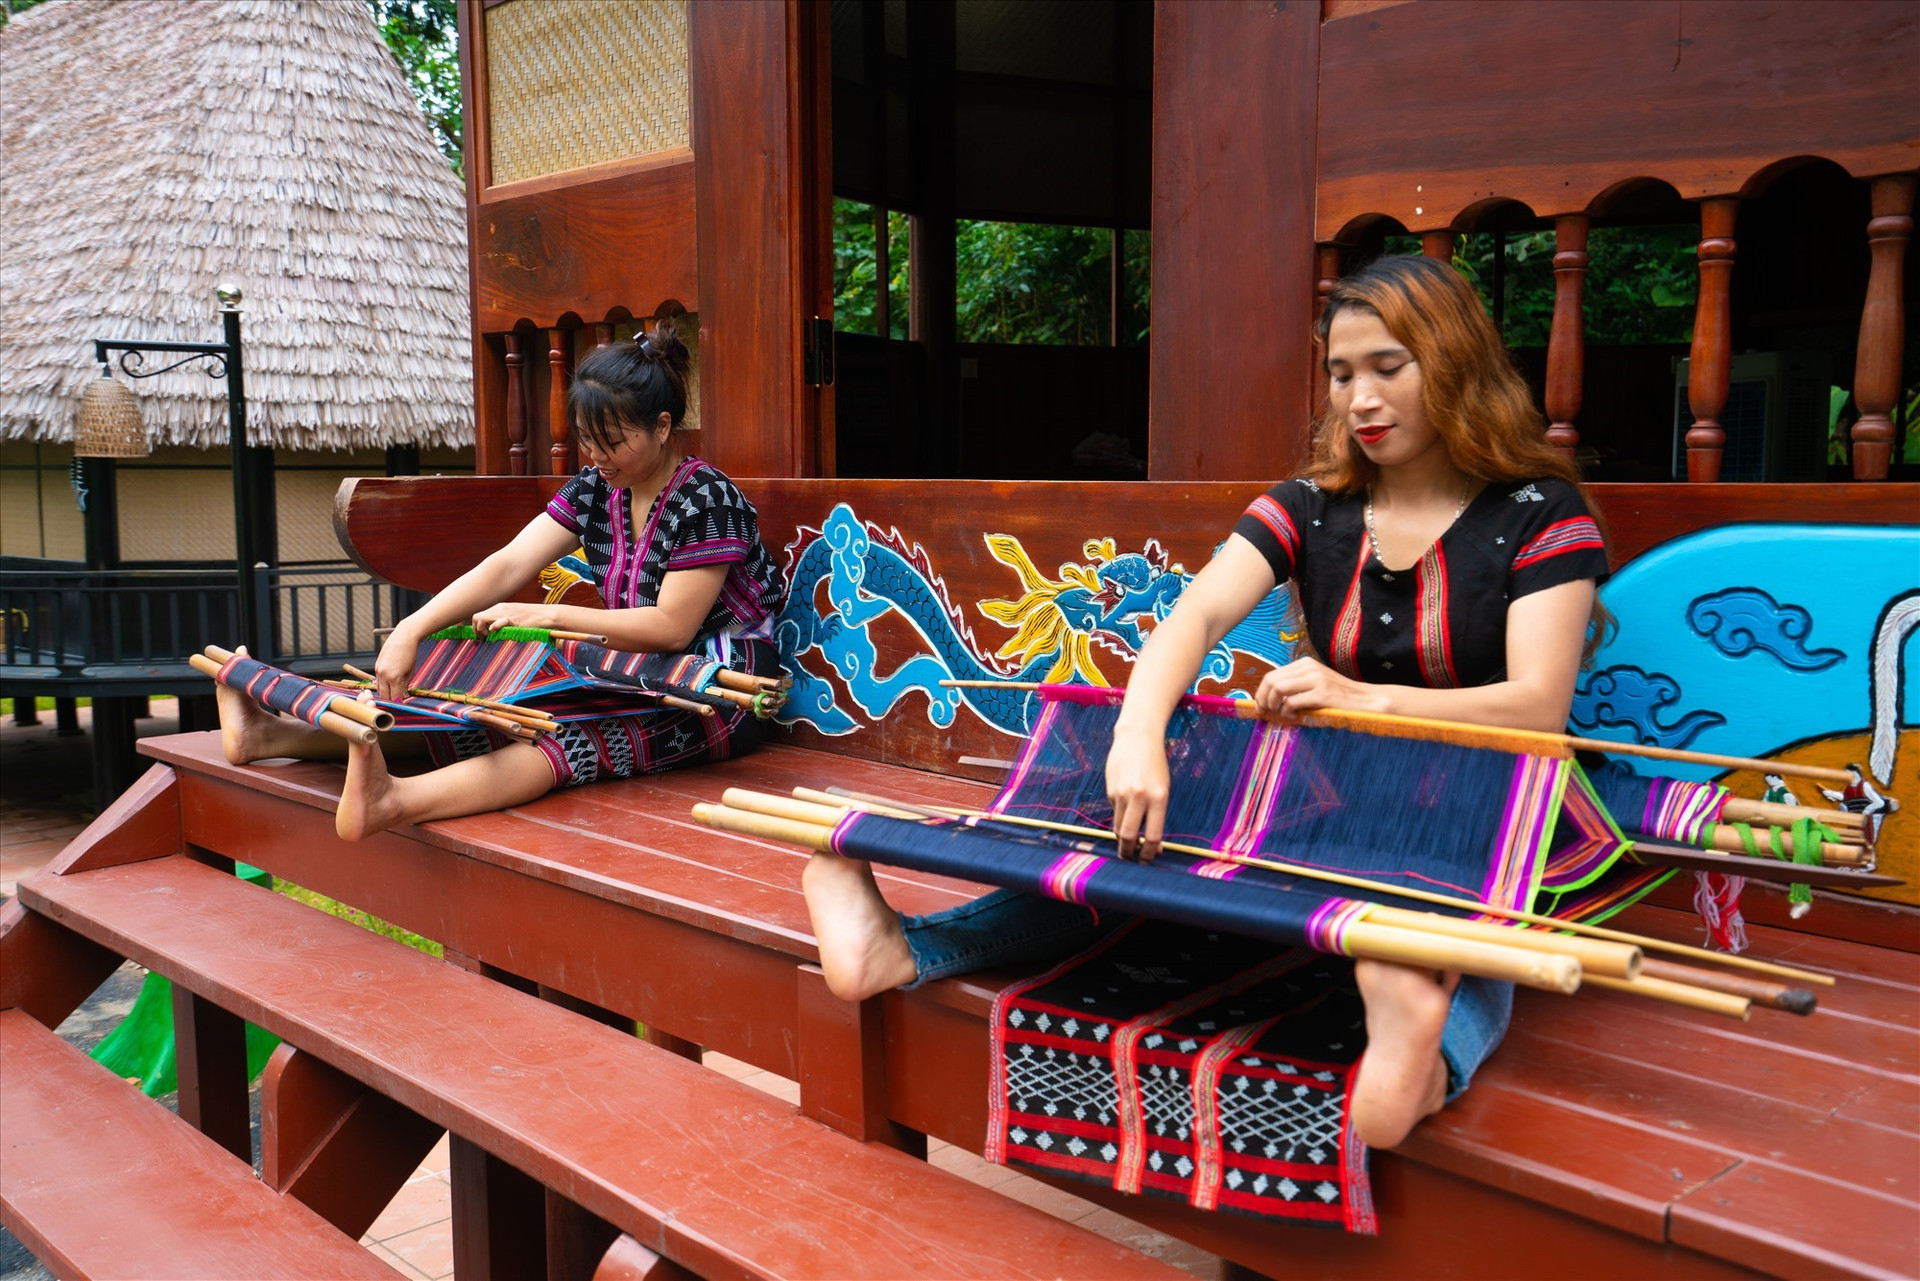 At Co Tu cultural village in Dong Giang Heaven Gate, visitors can discover the living space with indigenous architectural features, seeing local artisans weaving brocade, knitting rattan and bamboo baskets and papooses.